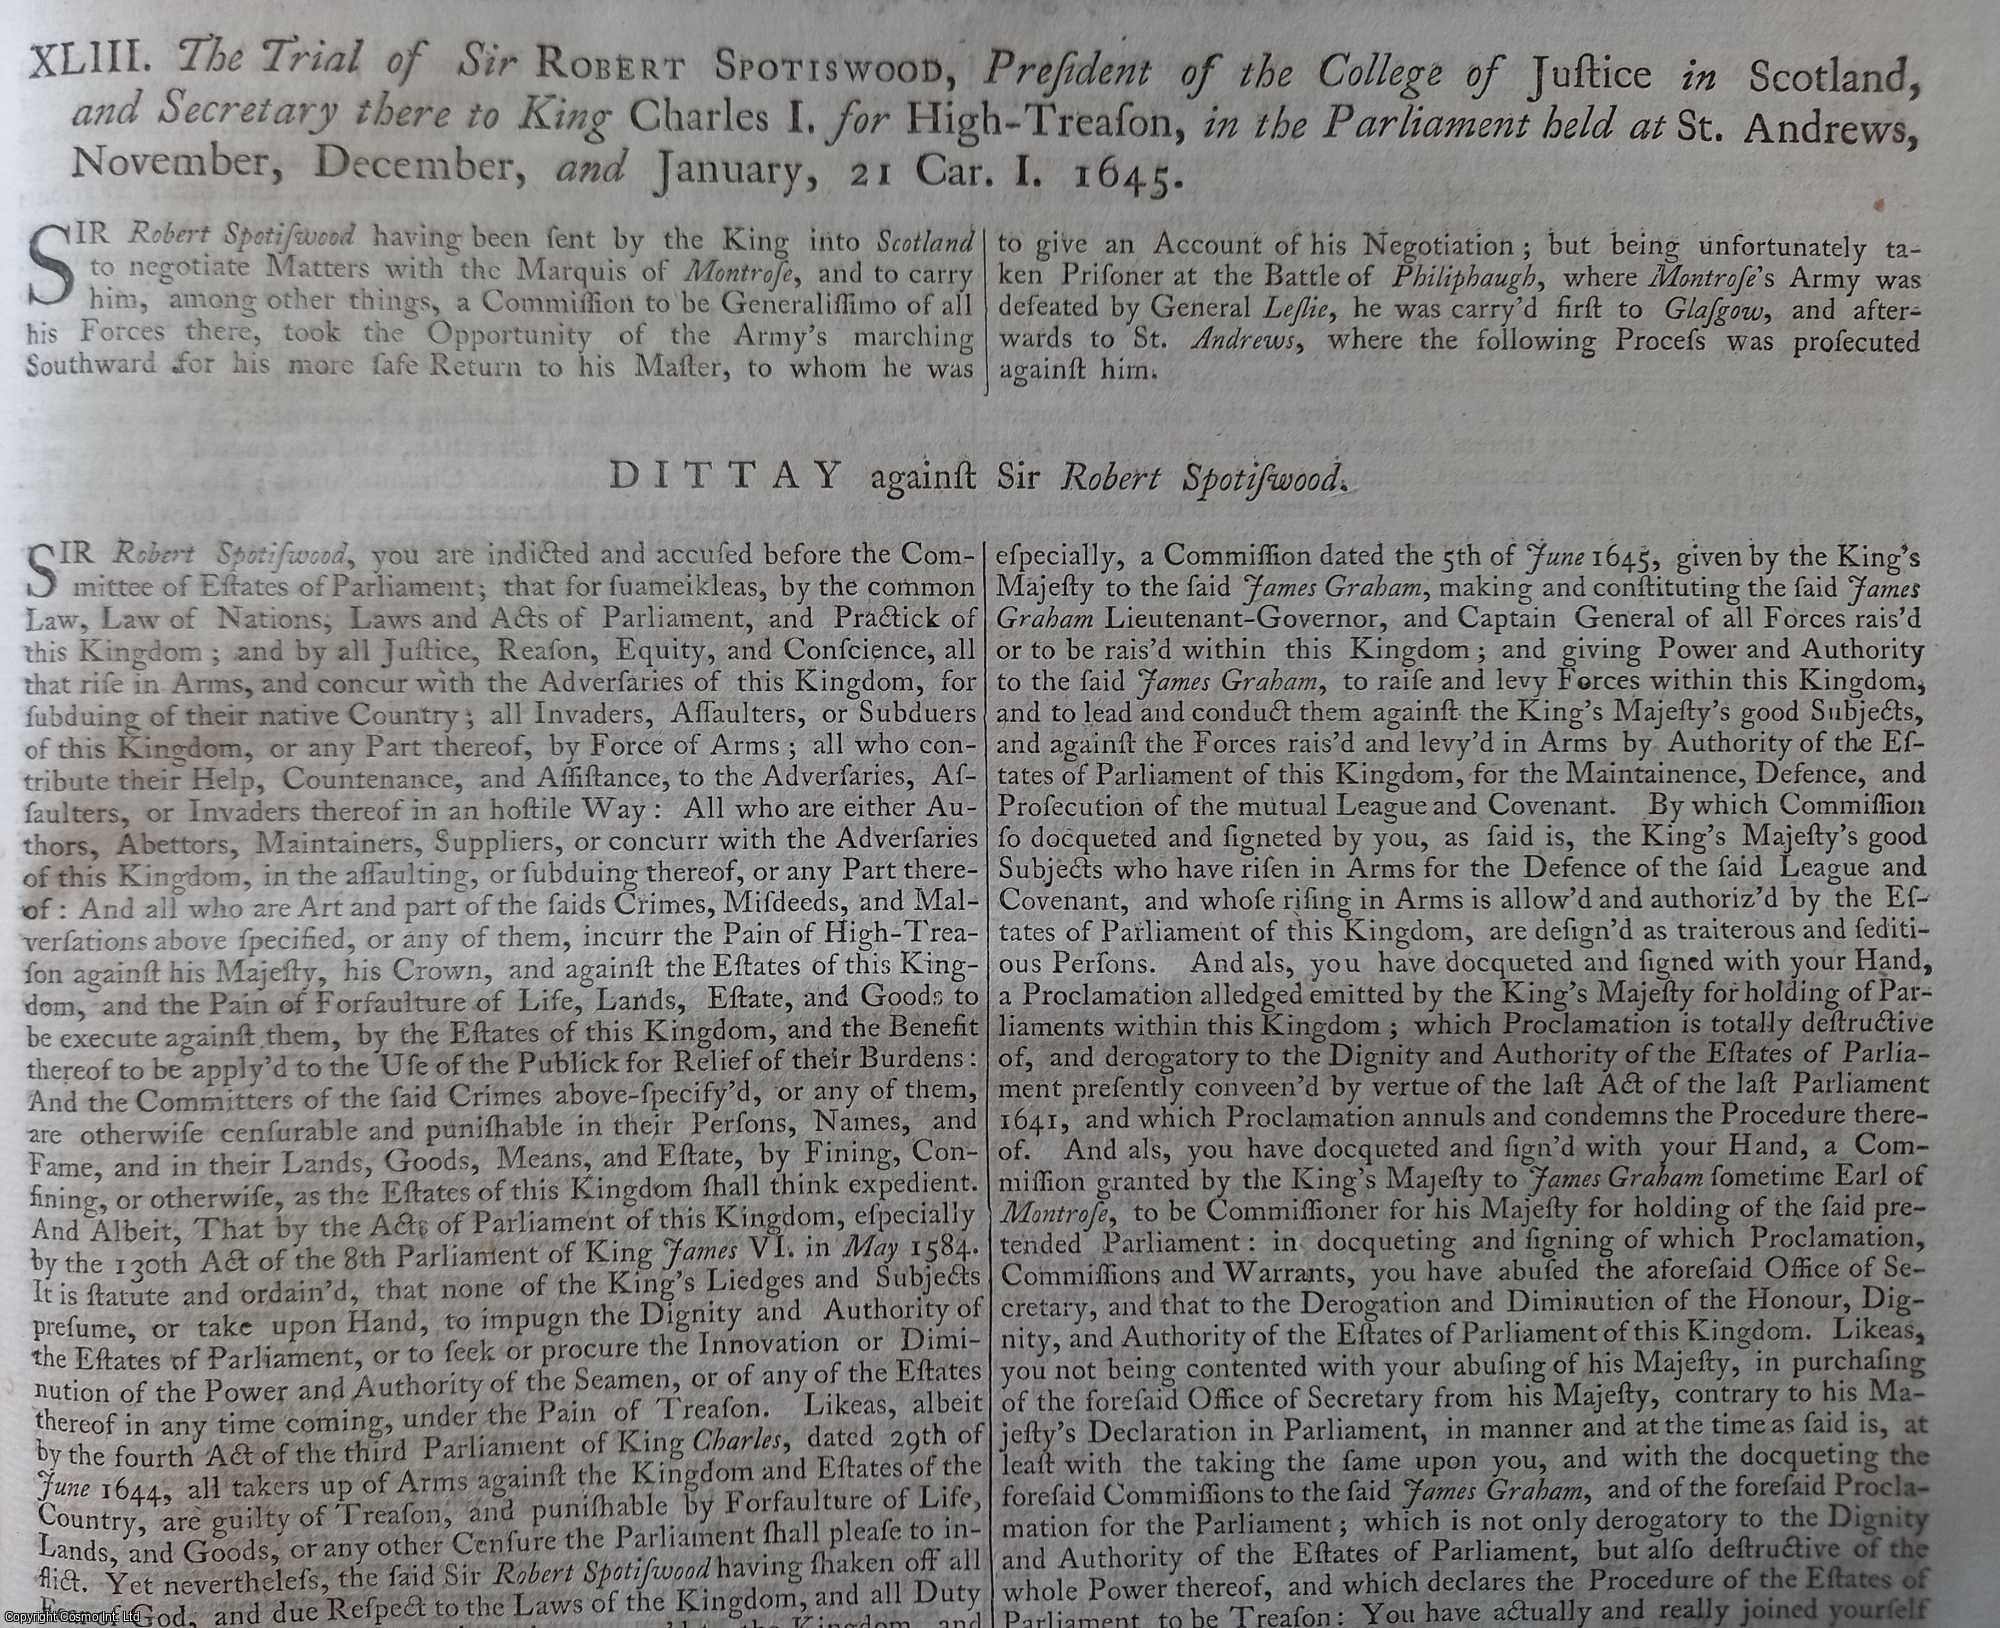 [Trial] - The Trial of Sir Robert Spotiswood, President of the College of Justice in Scotland, and secretary there to King Charles I. for High-Treason, in the Parliament held at st. Andrews, November, December and January, 21 1645. An original article from the Collected State Trials.